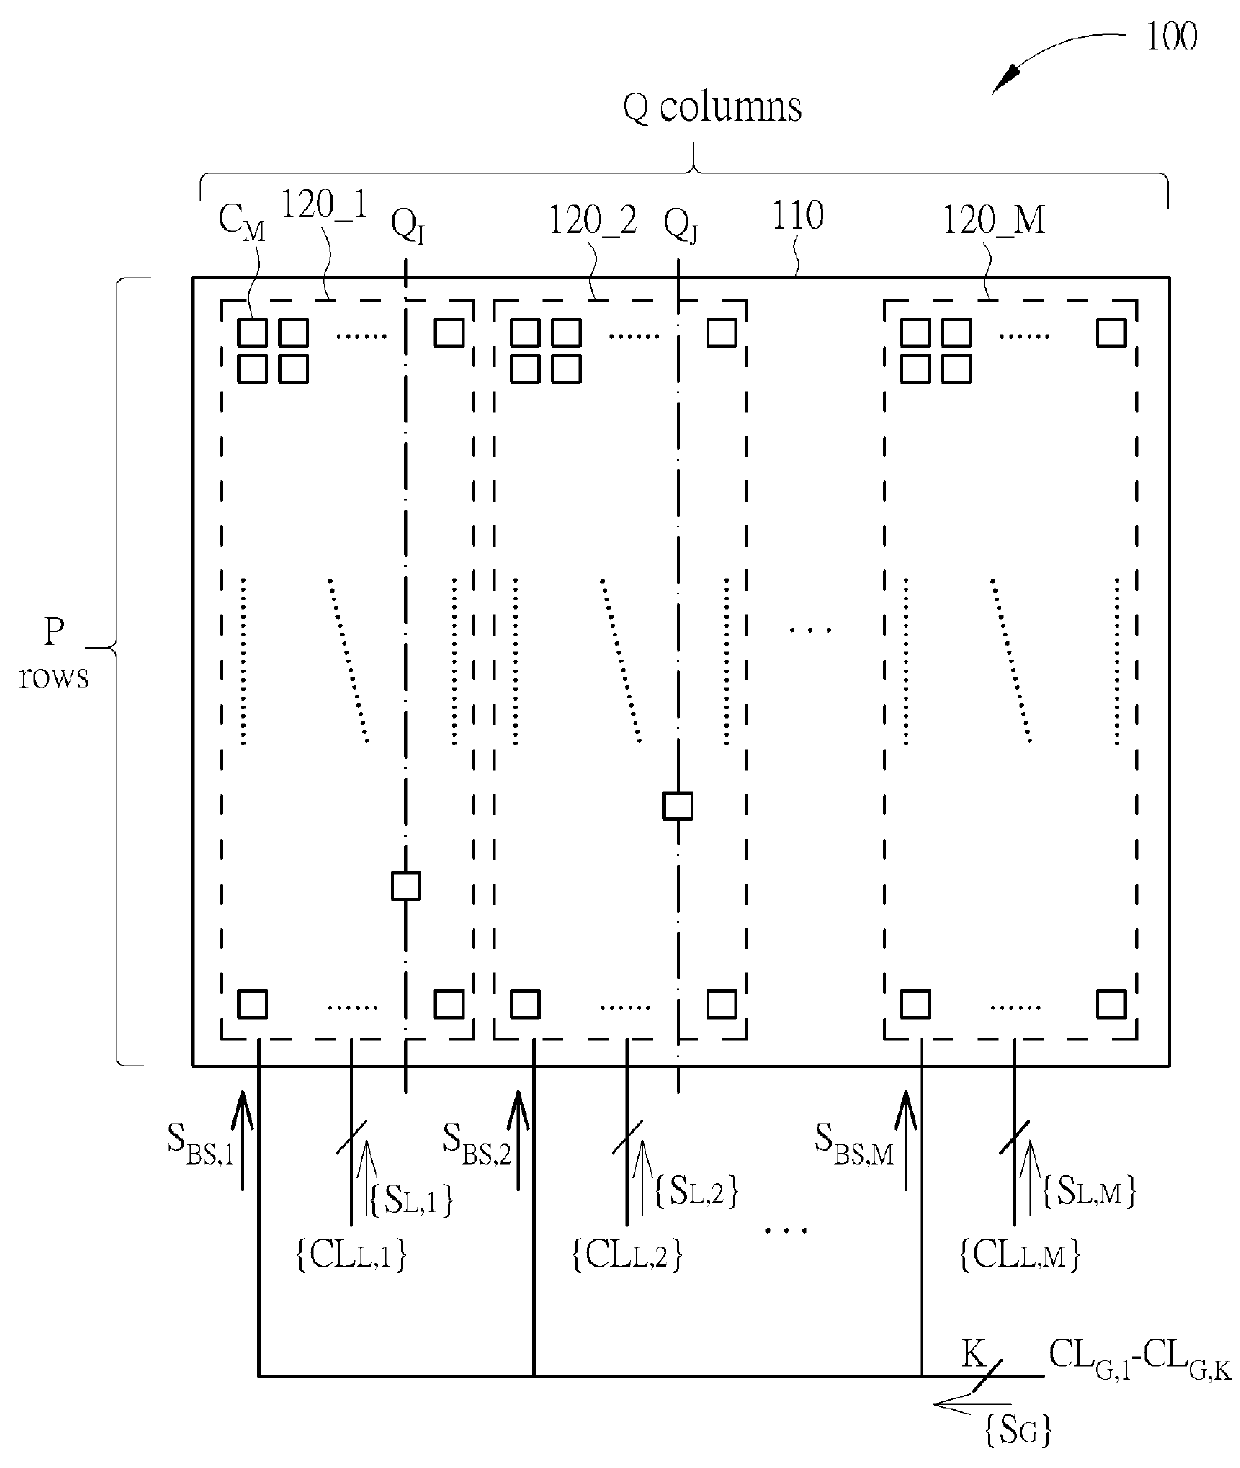 Memory architecture with multi-bank memory cell array accessed by local drive circuit within memory bank